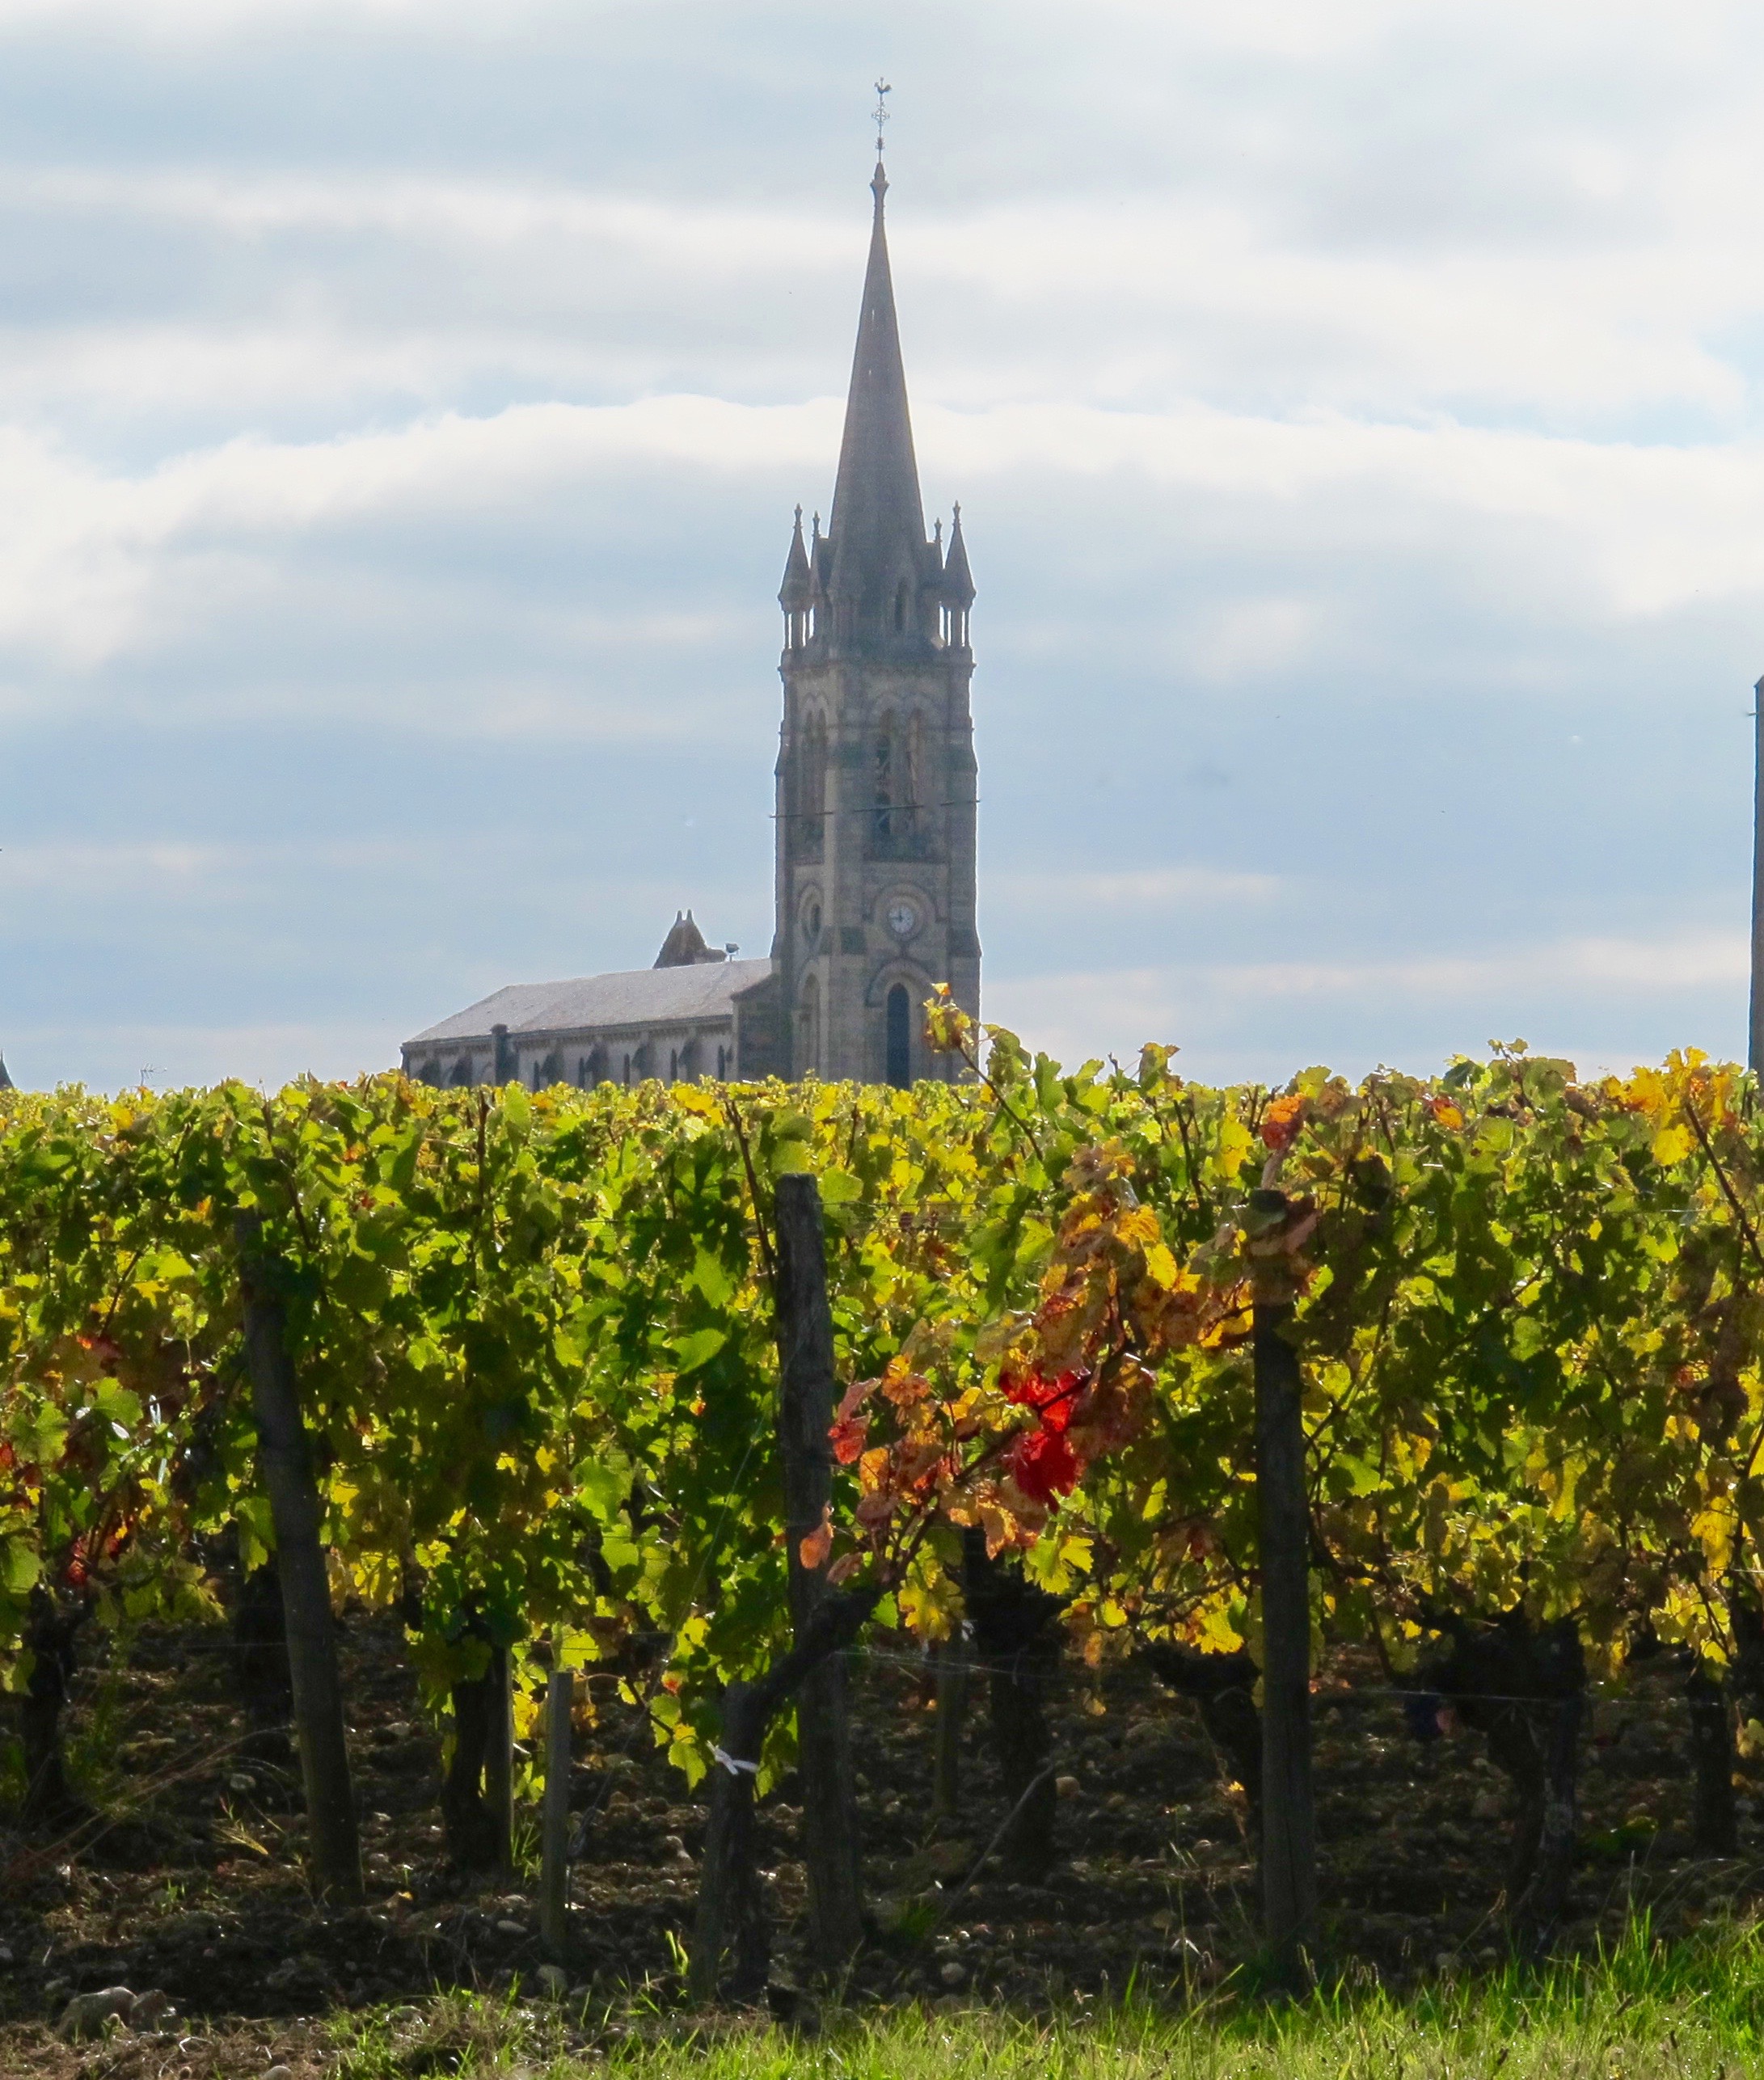 L’Eglise of Pomerol – an ancient landmark and namesake for several local wineries. Photo by Marla Norman.